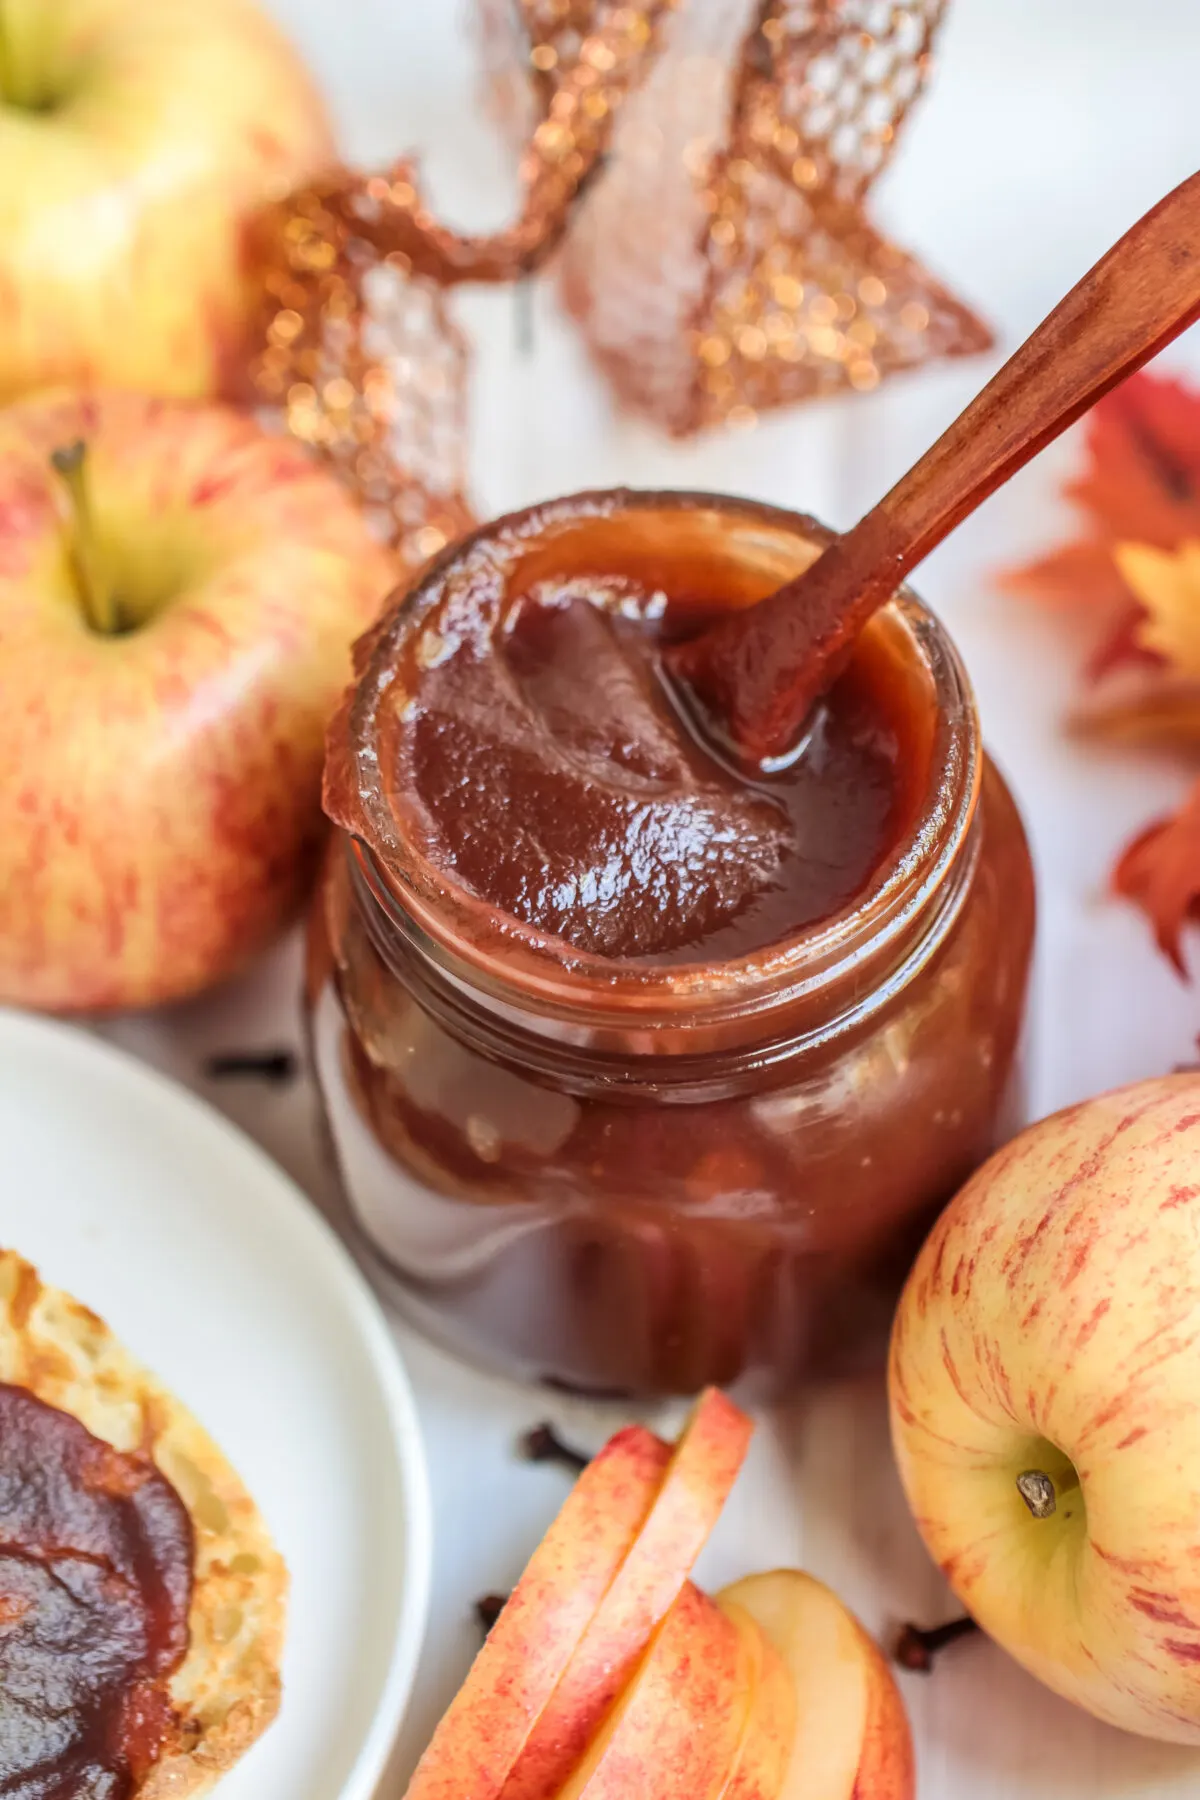 Don't wait all day to make your own tasty apple butter! With this easy Instant Pot recipe, you can get the perfect flavour in no time.